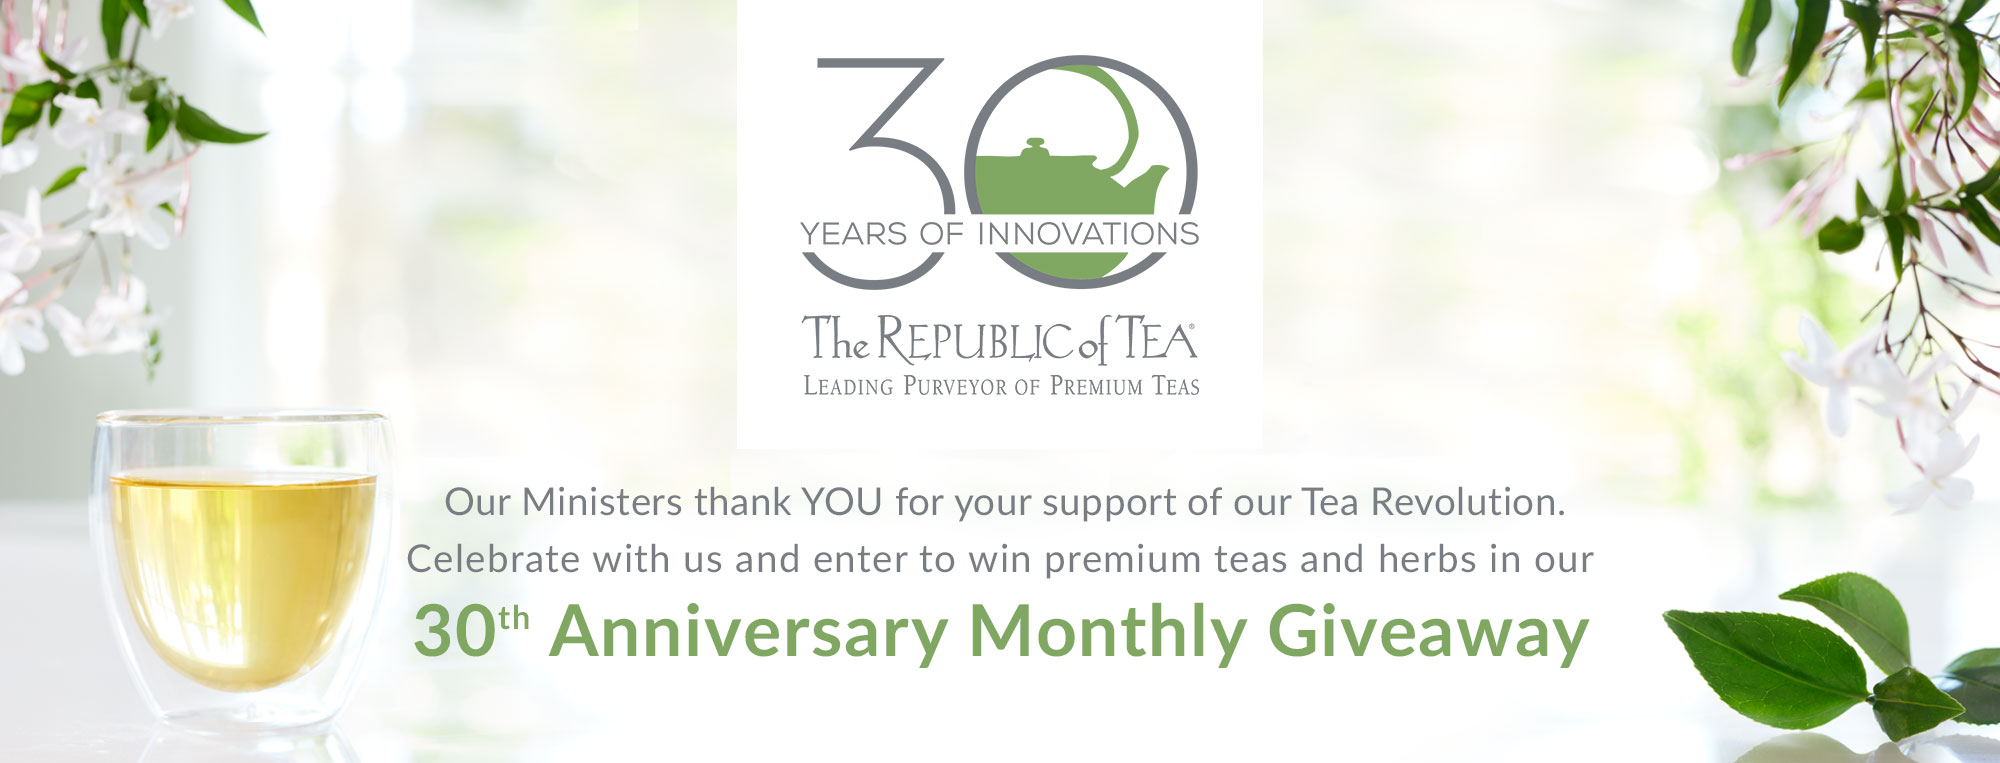 <p>Our Ministers thank YOU for your support of our Tea Revolution. Celebrate with us and enter to win premium teas and herbs in our</p>
